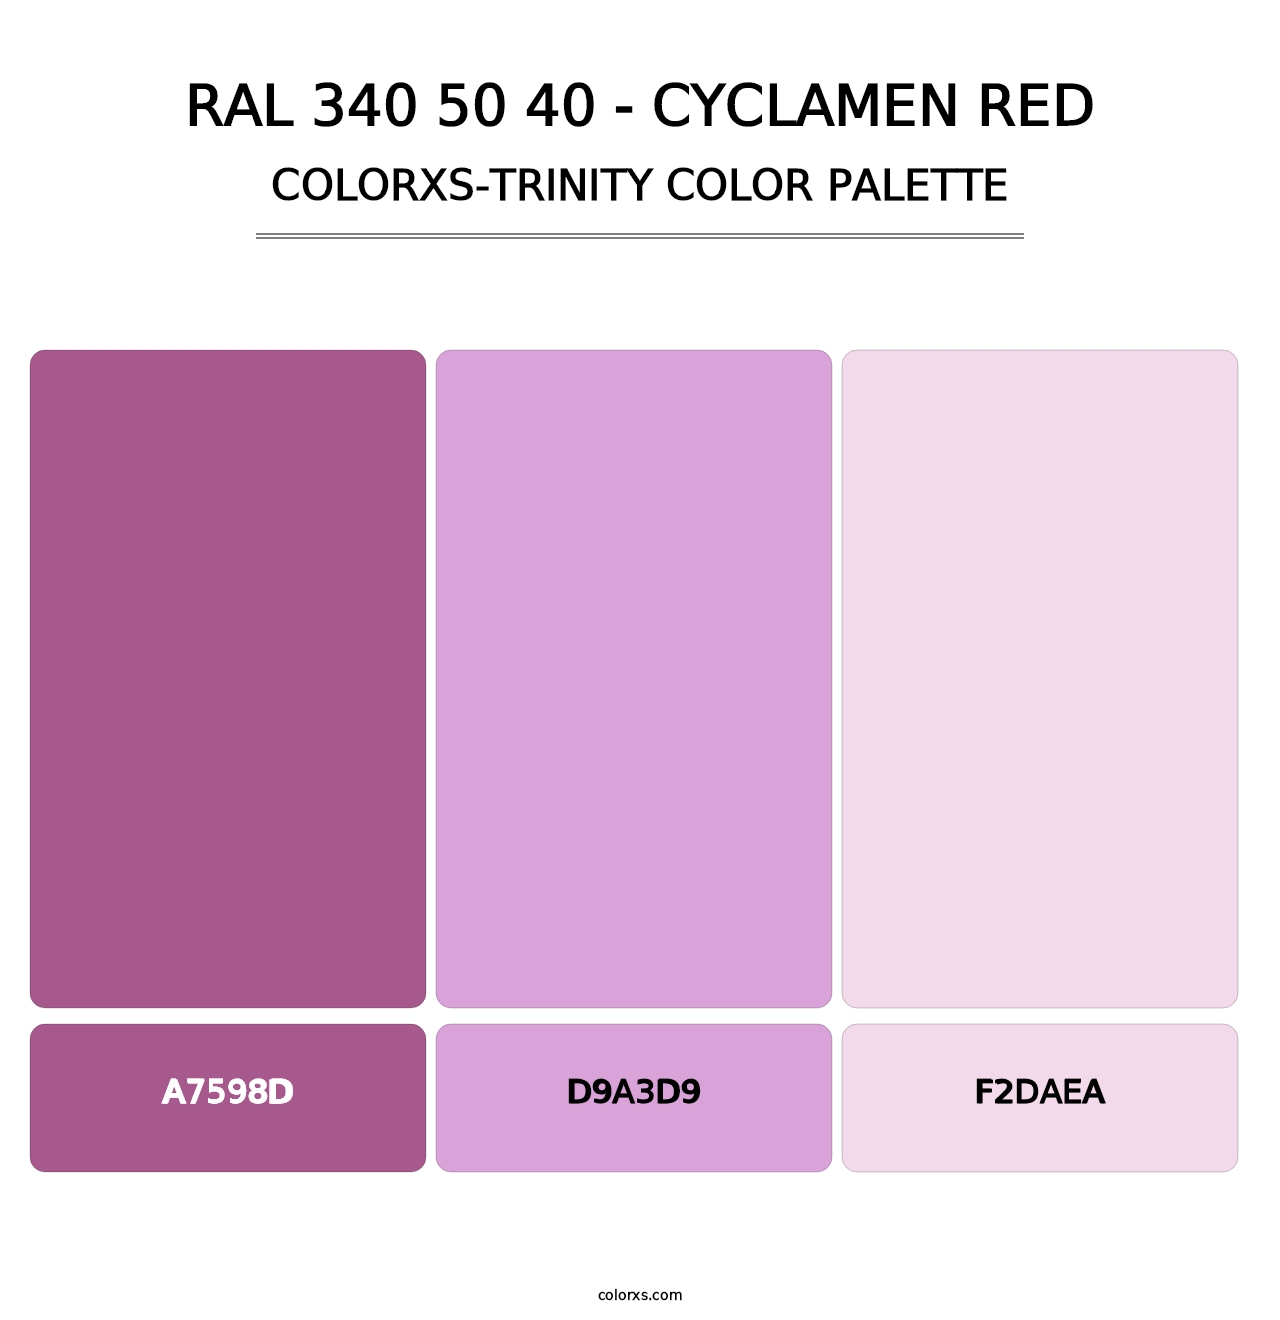 RAL 340 50 40 - Cyclamen Red - Colorxs Trinity Palette